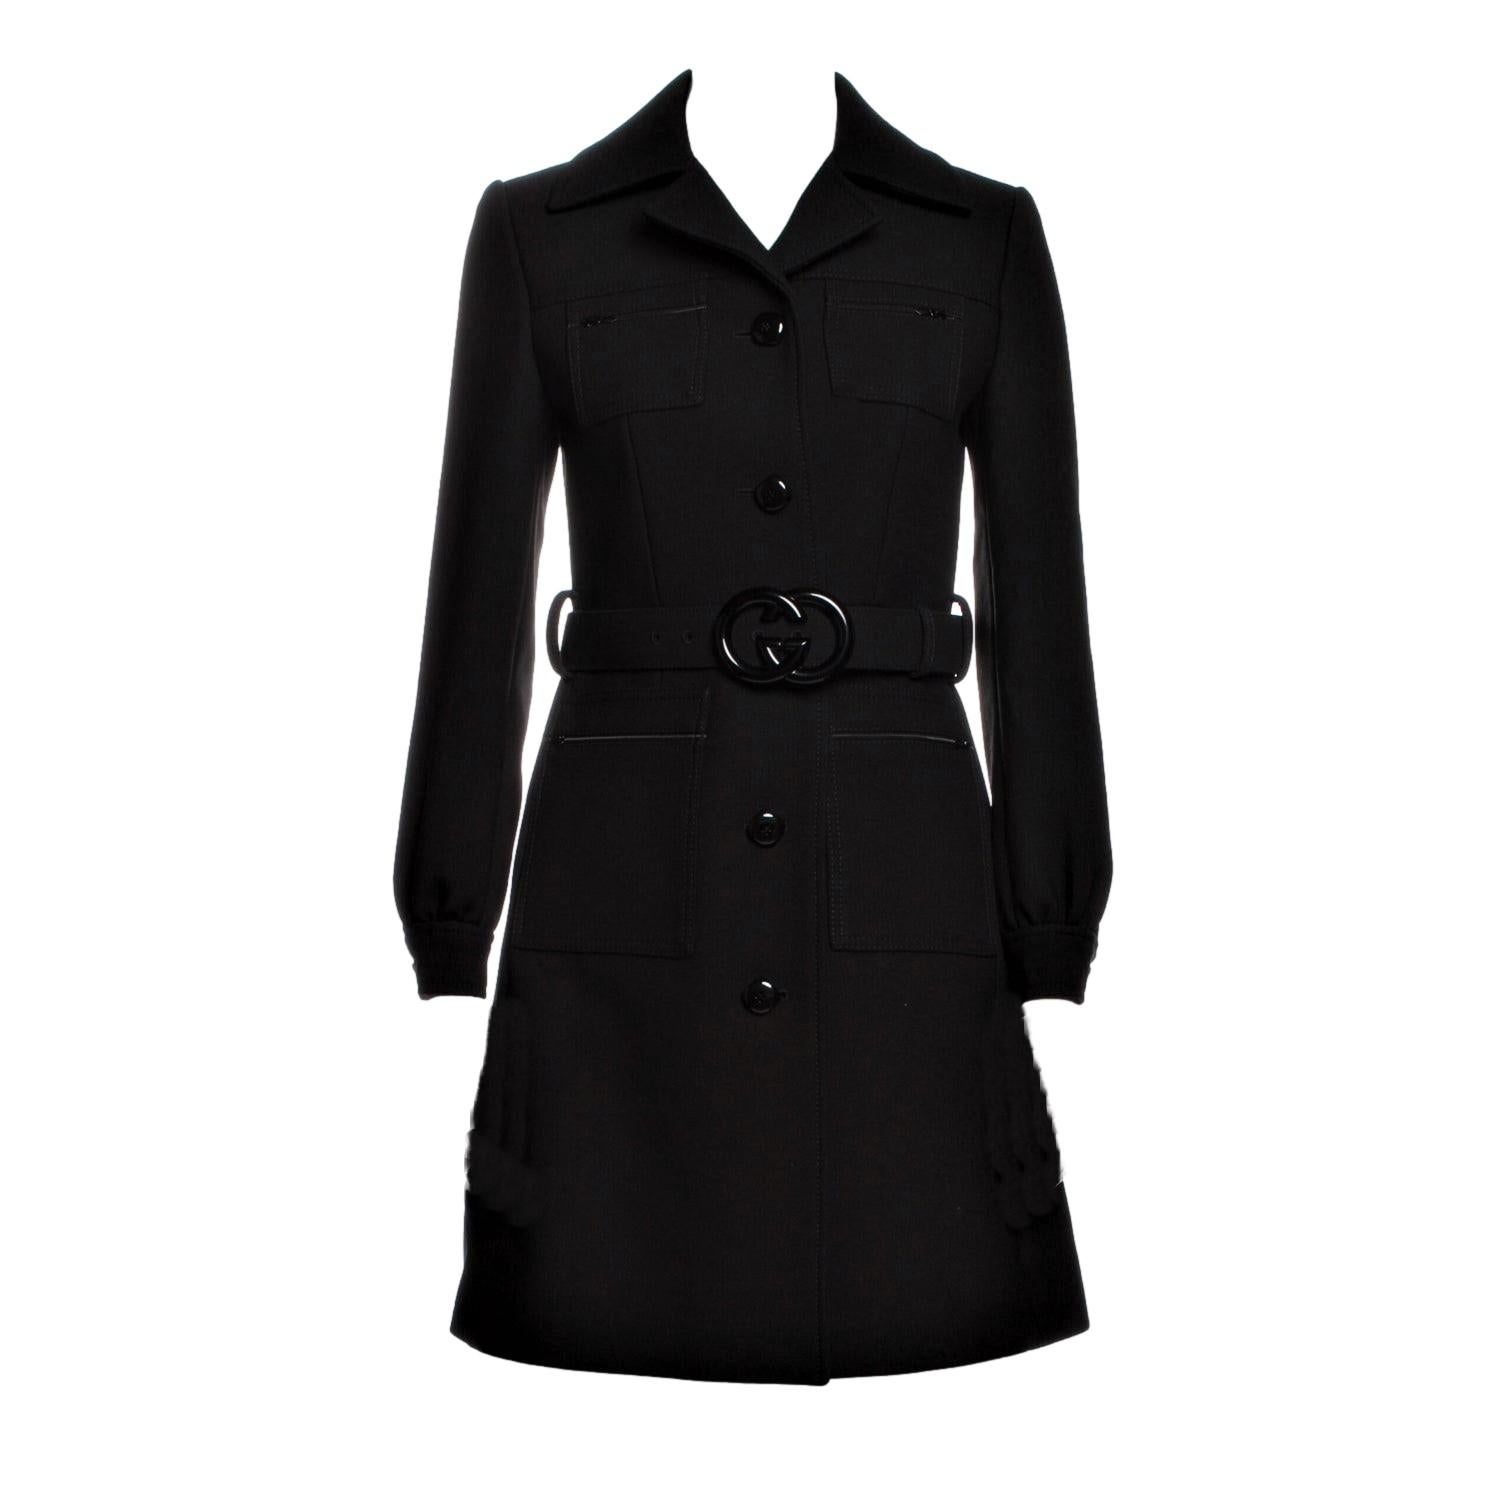 New With Tags Gucci Pre Fall 2019 Wool Belted Peacoat Jacket Coat $3980 Sz 44 In New Condition In Leesburg, VA